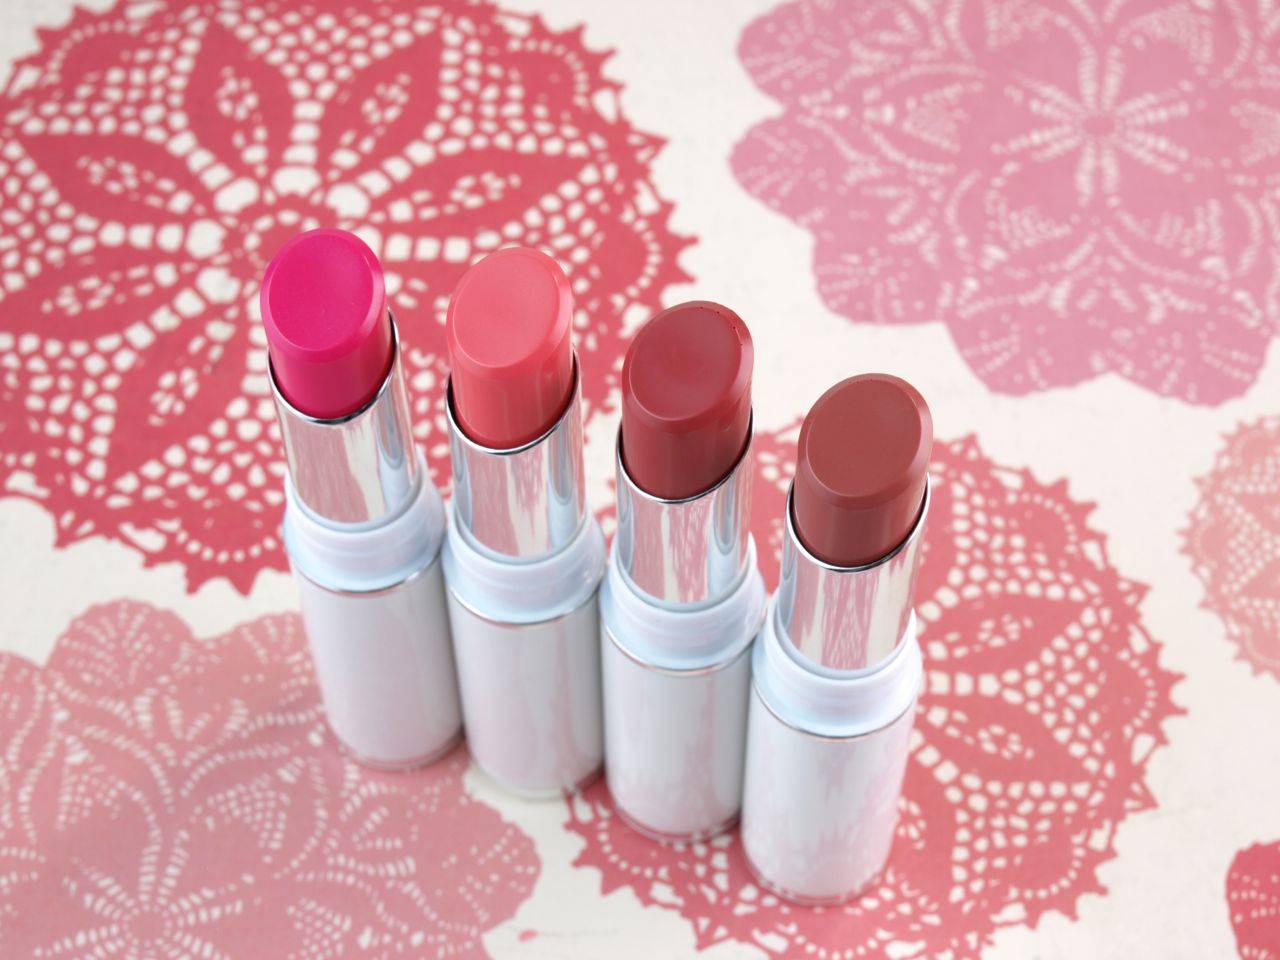 Lancome Shine Lover Vibrant Shine Lipsticks: Review and Swatches